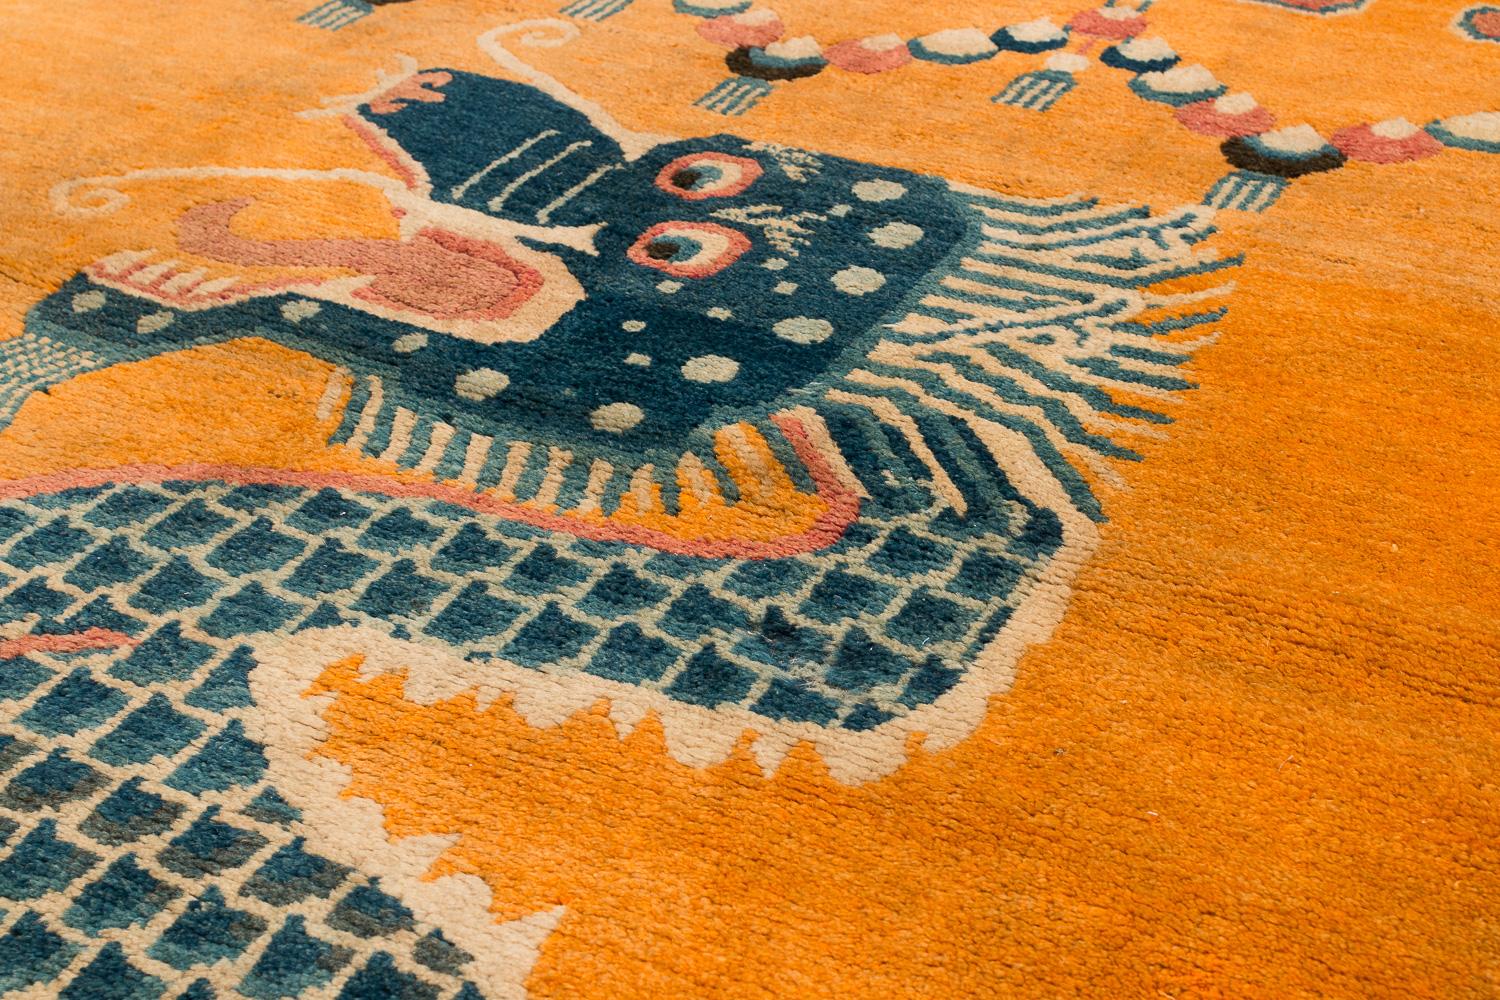 Hand-Woven 19th Century Dragon Rug from Tibet